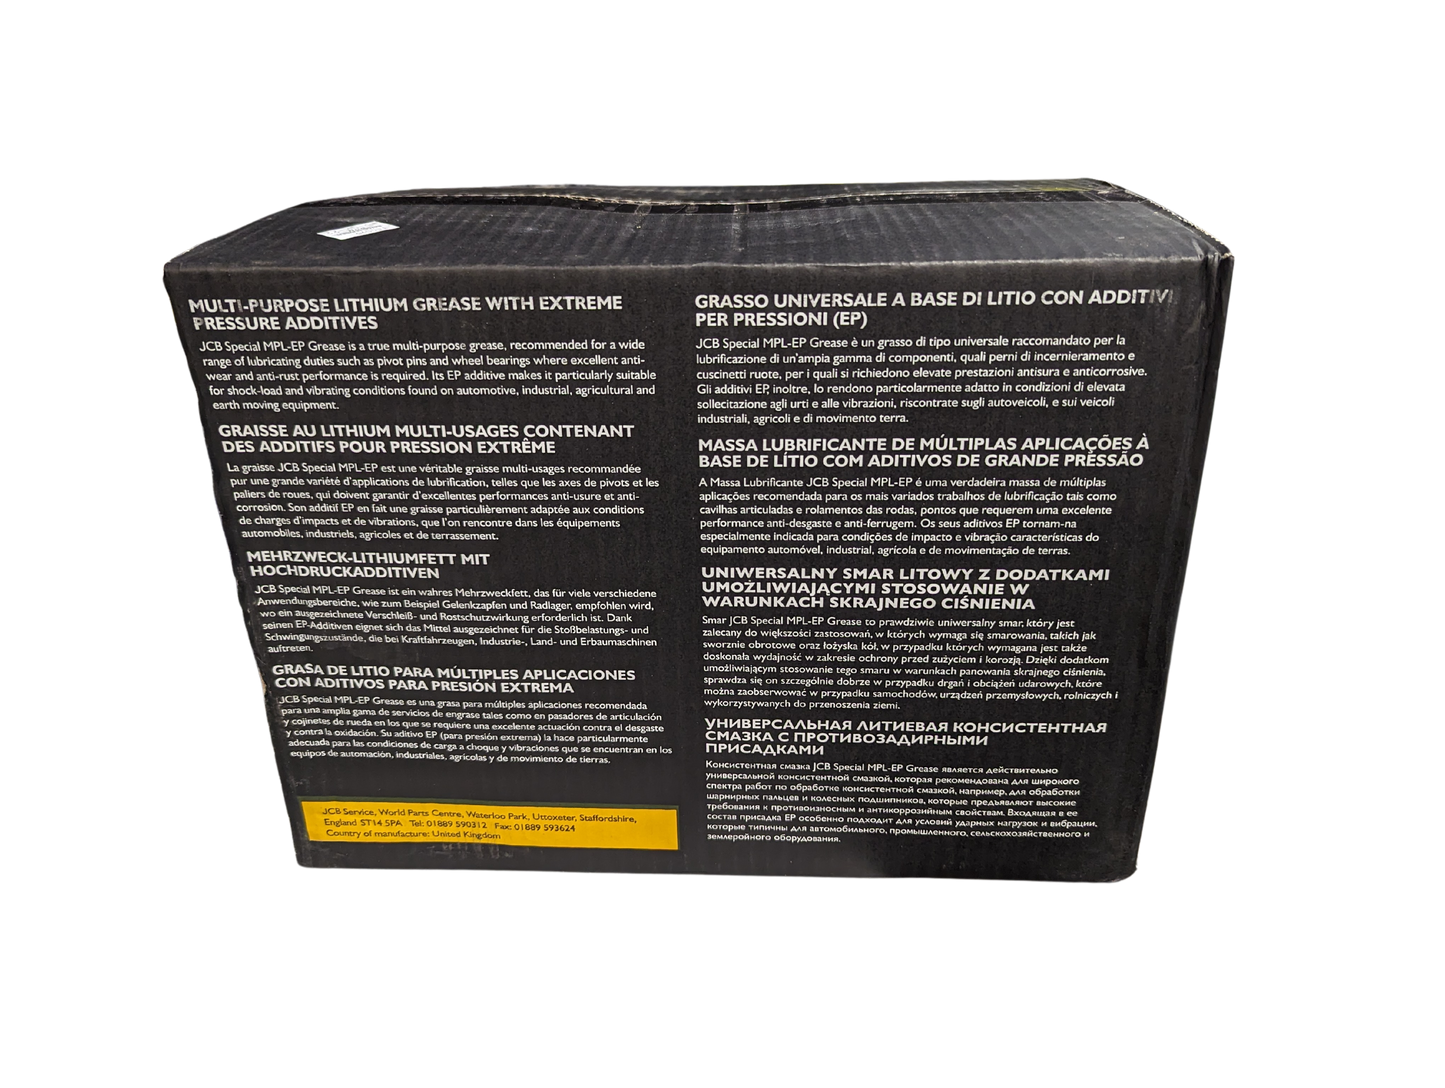 JCB Special MPL-EP Grease 400g (Box of 24): 4003/1501